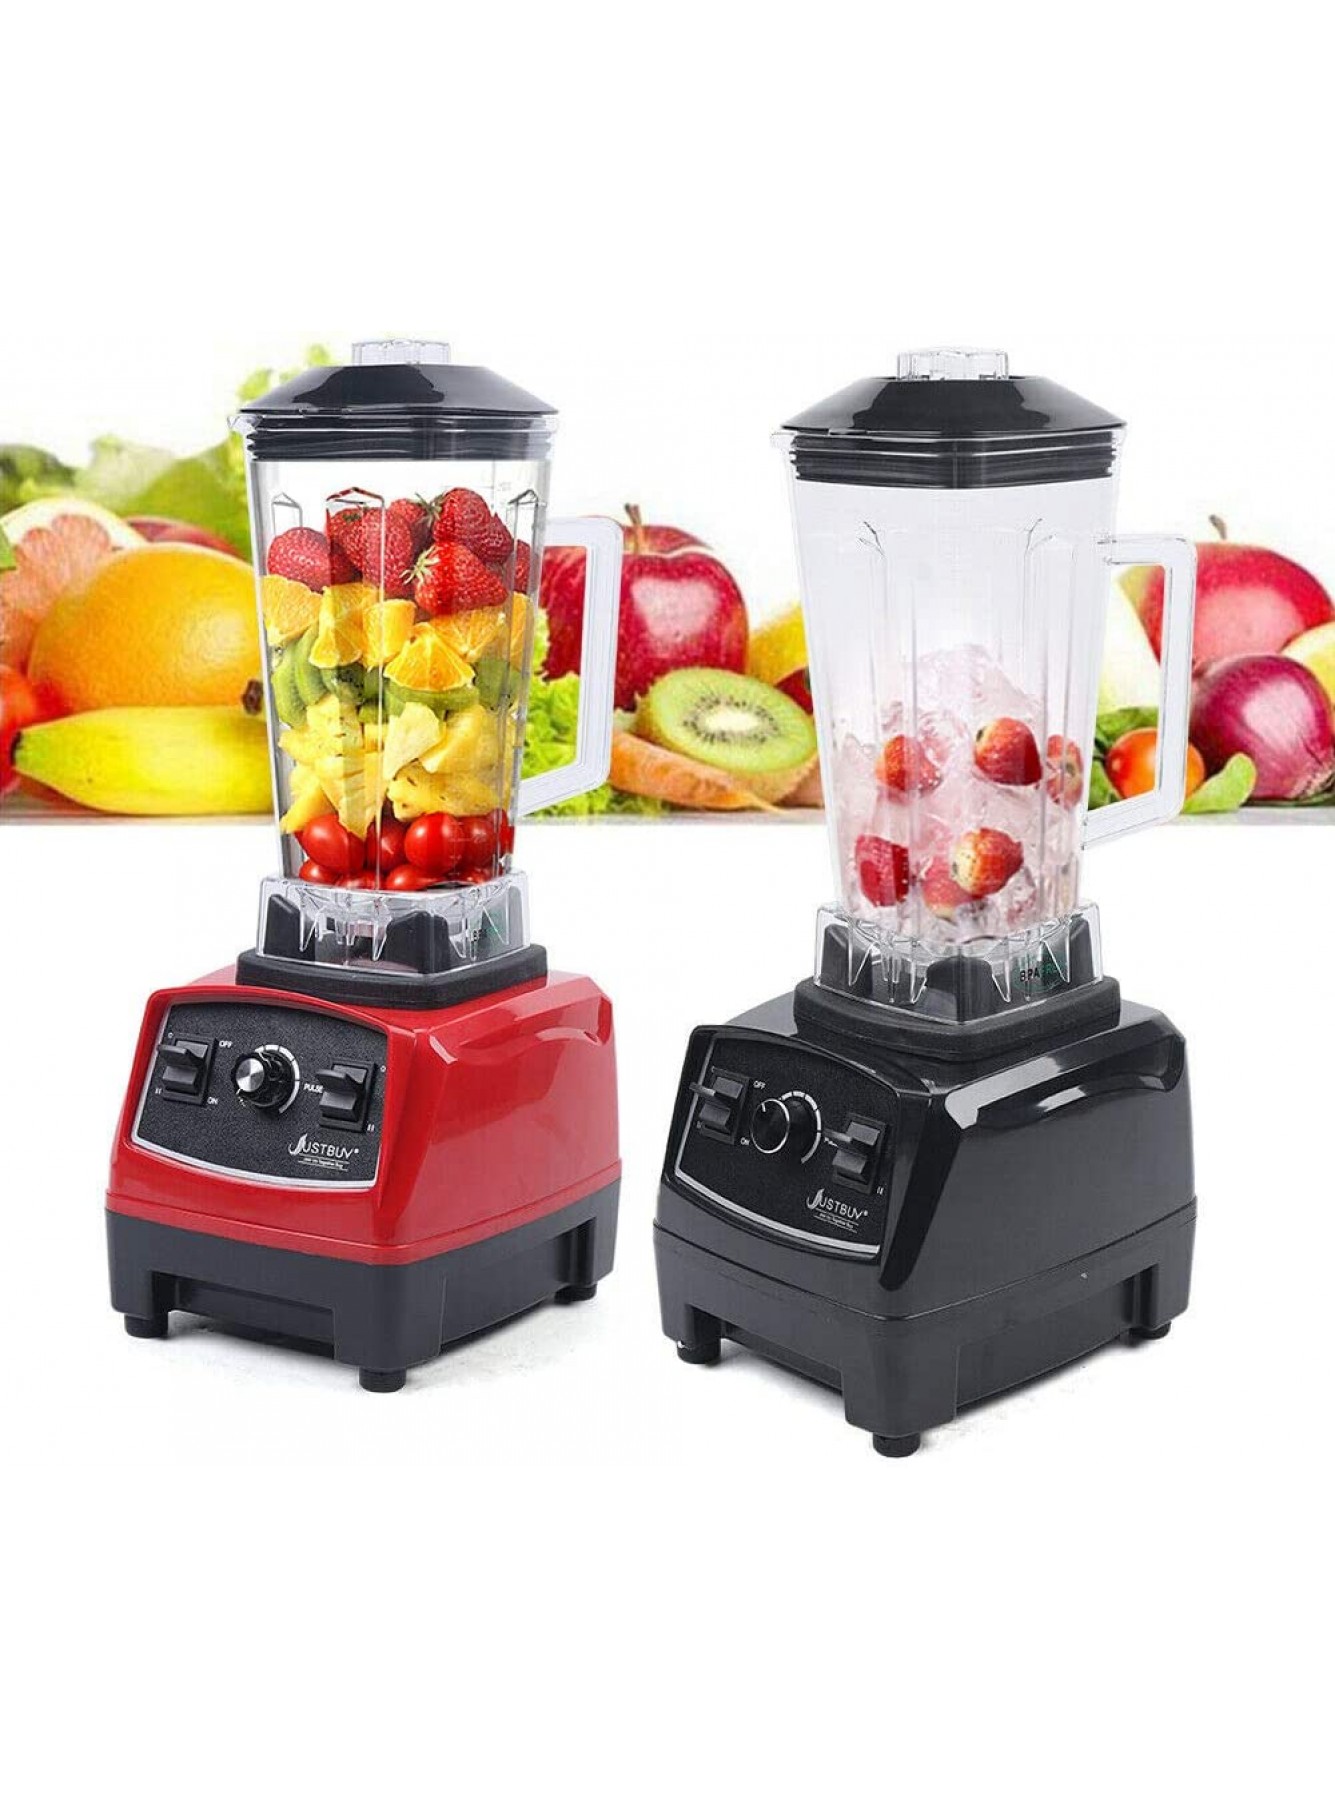 2L Red Smoothie Machine Duty Commercial Grade Auto Blender Variable Speed Control1-10 Gears Speed Countertop Blender Smoothie Maker 2200W Food Mixer Juicer 110V for Food Fruit Ice no BPA Red B08K93X1VL